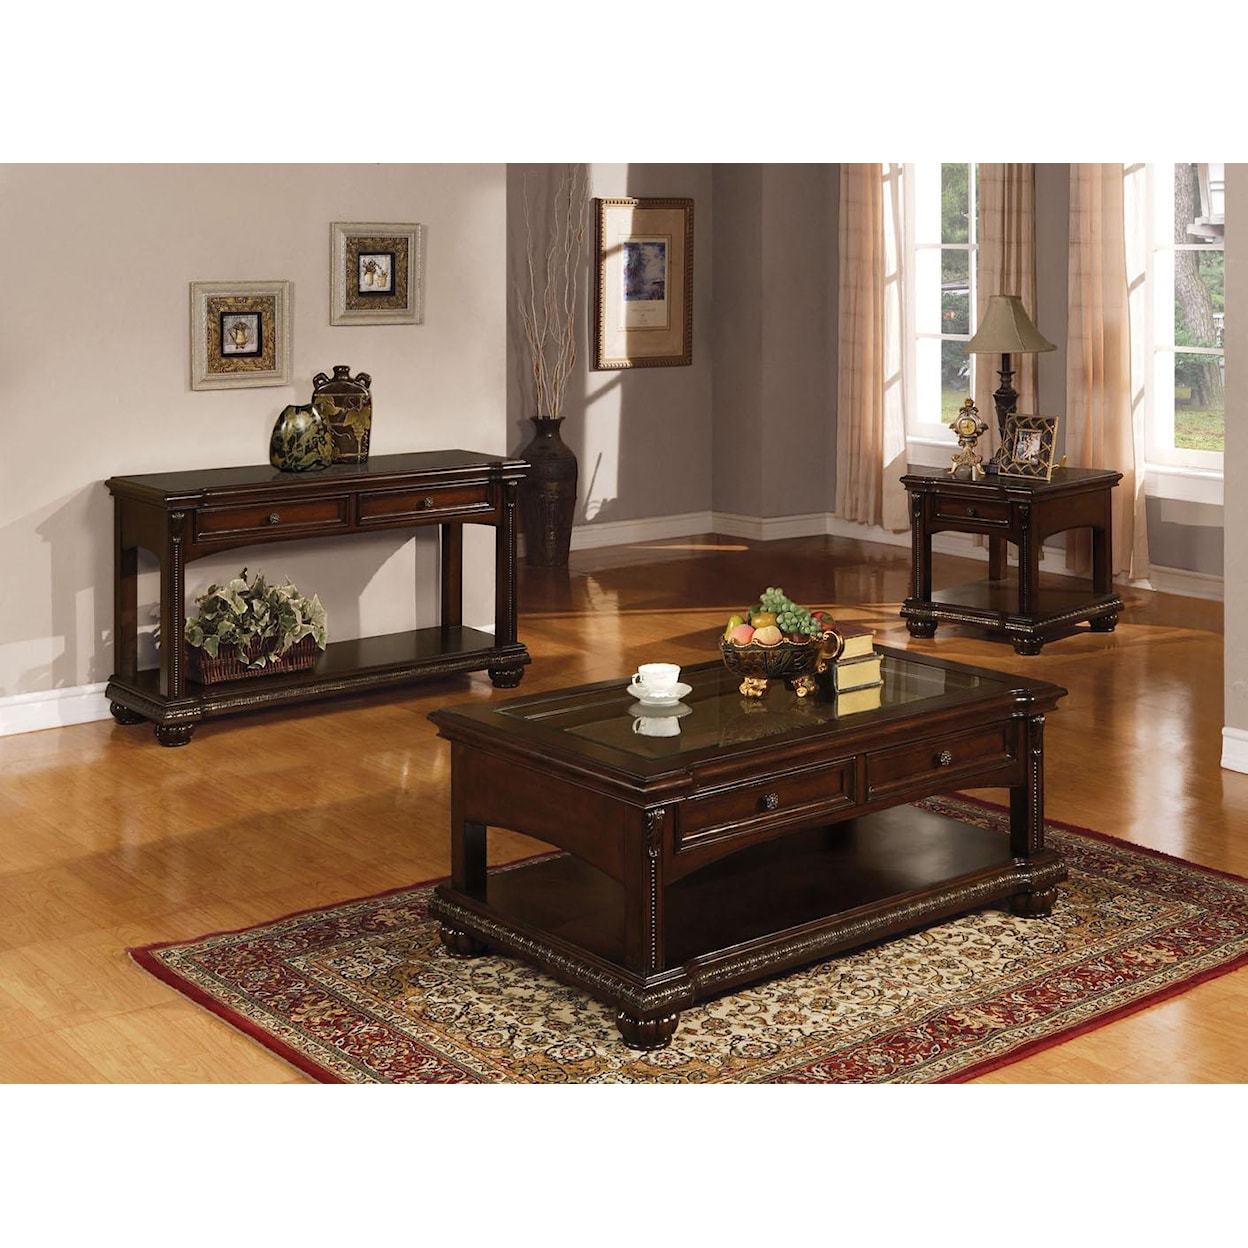 Acme Furniture Anondale Traditional Coffee Table